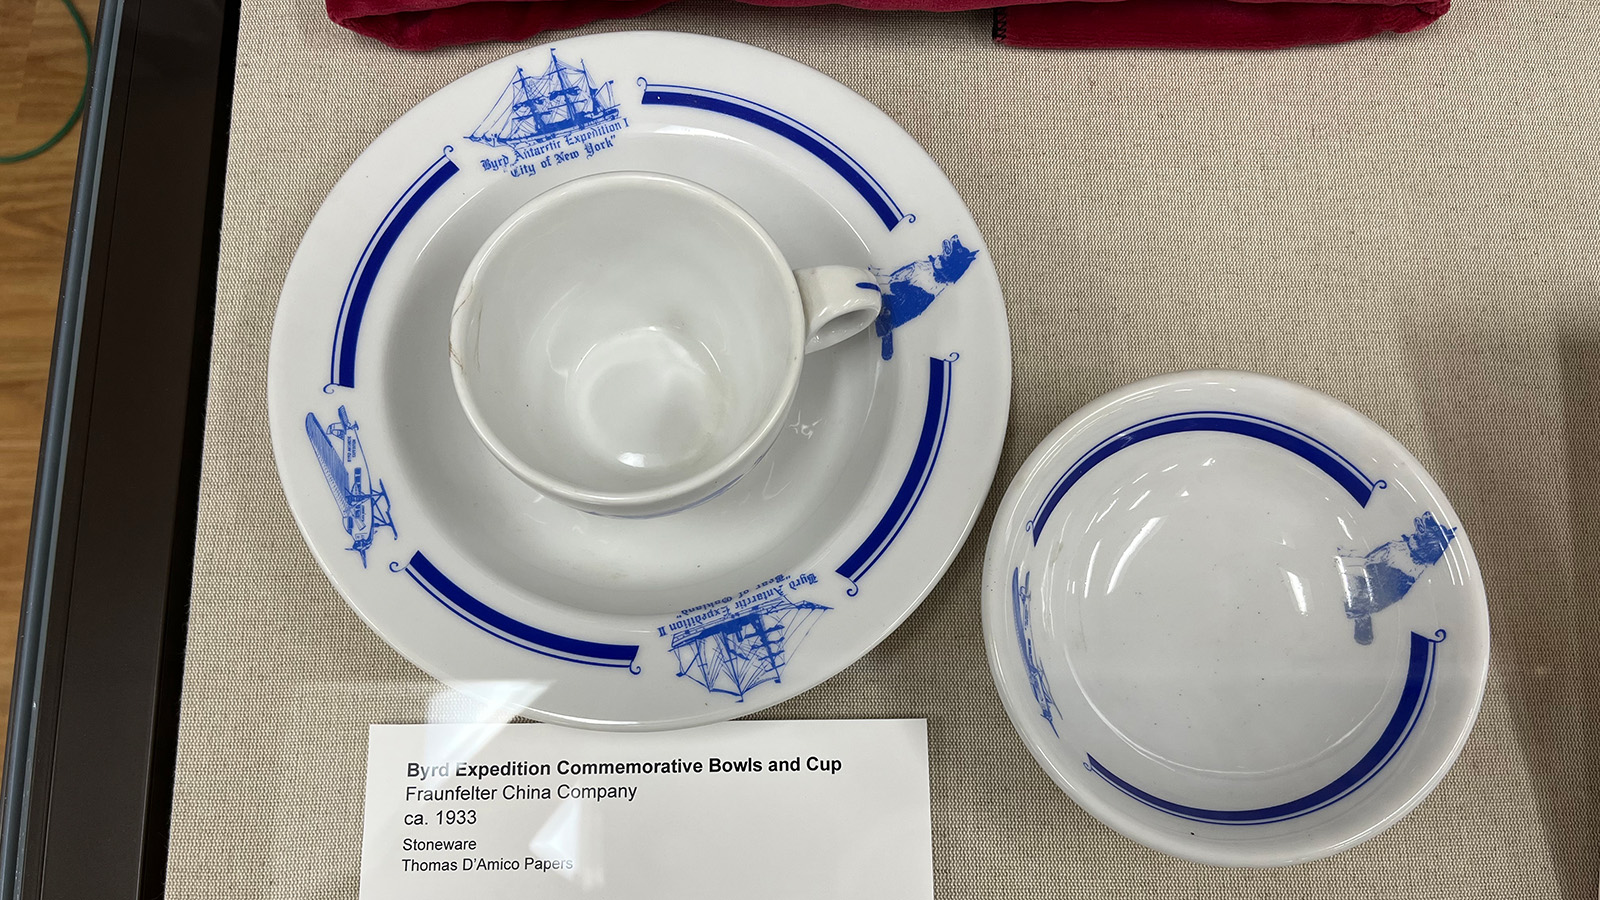 Byrd Expedition commemorative bowls and cup. They are white china with blue detail showing ships, planes, and dogs.